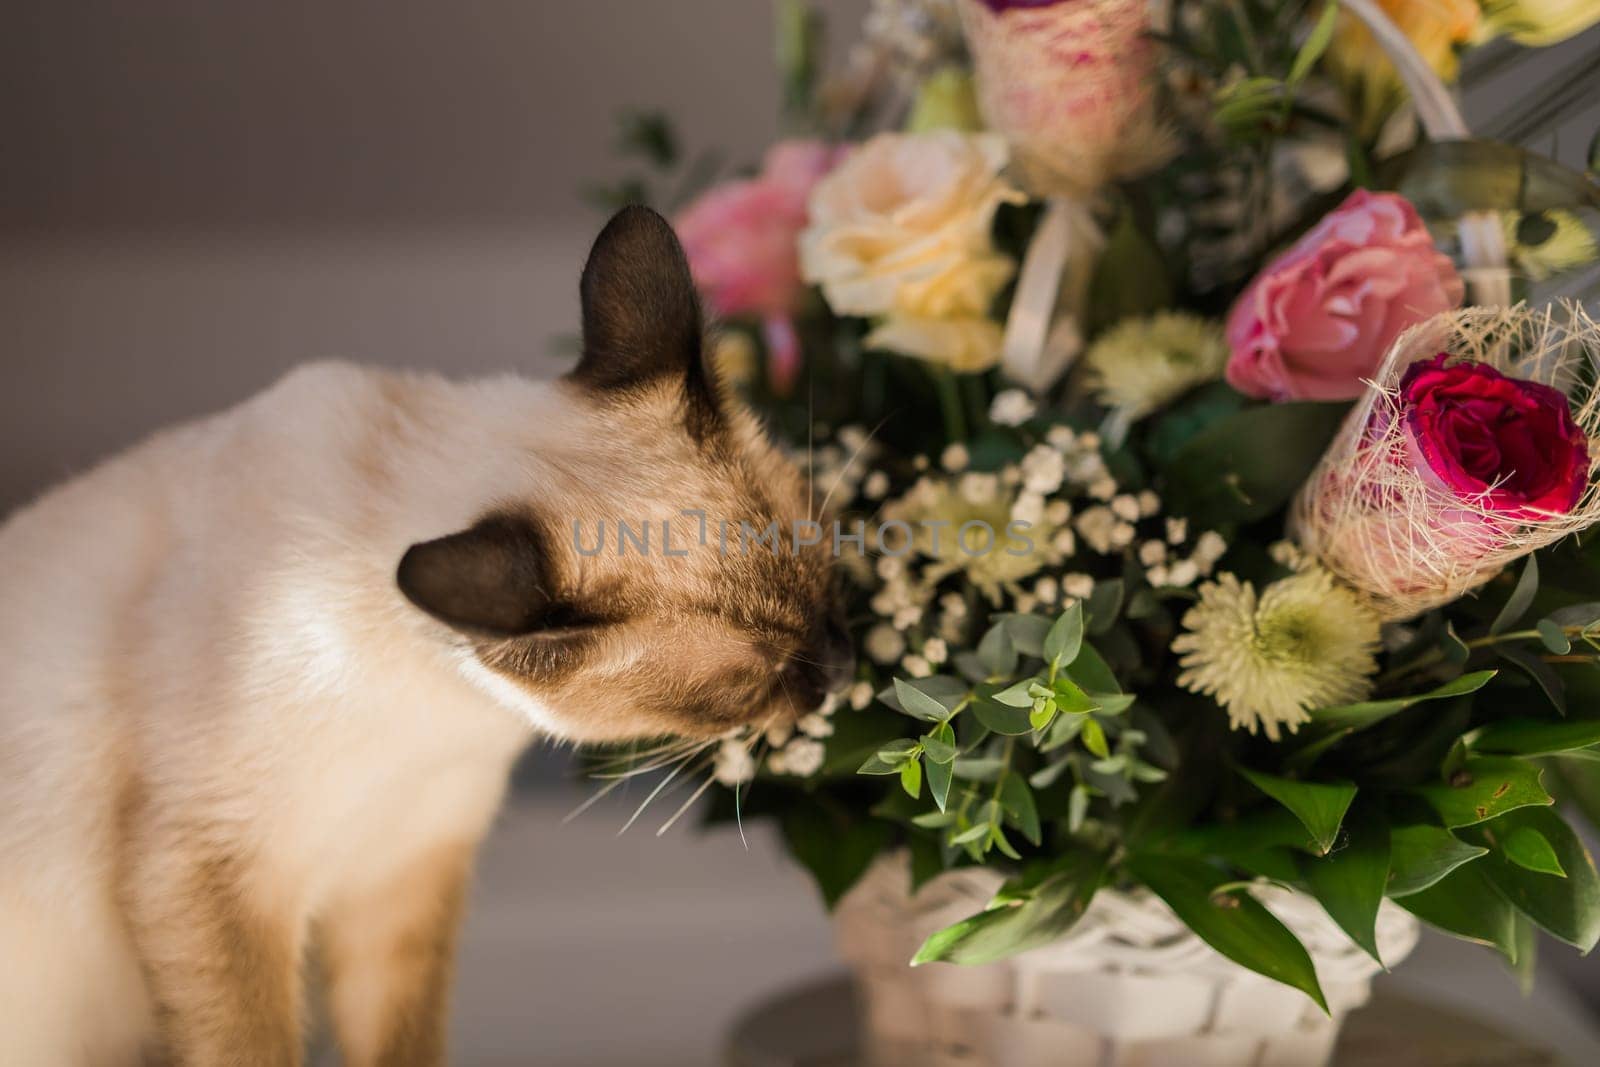 Hungry siamese cat portrait. Kitten is smelling flowers waiting for snacks on background of basket with roses at home by Satura86